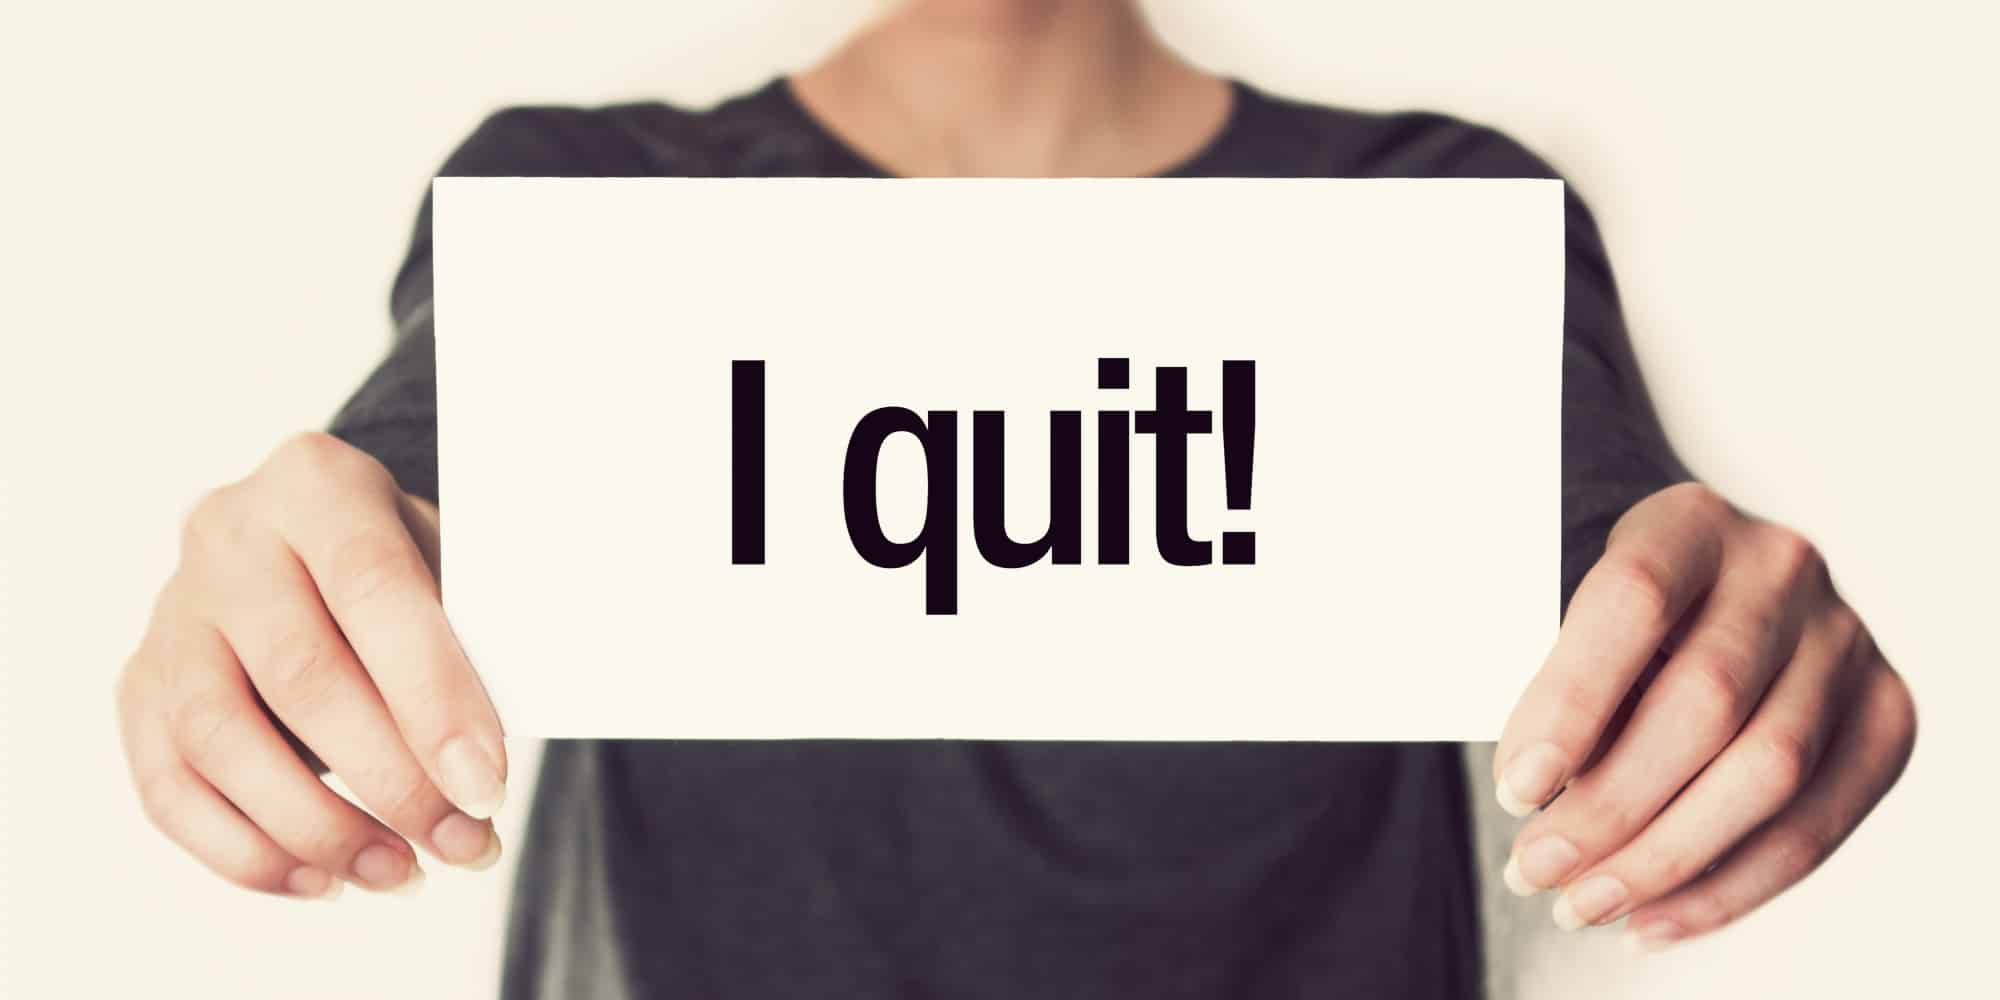 Quitting IS an option – Exercise pressure